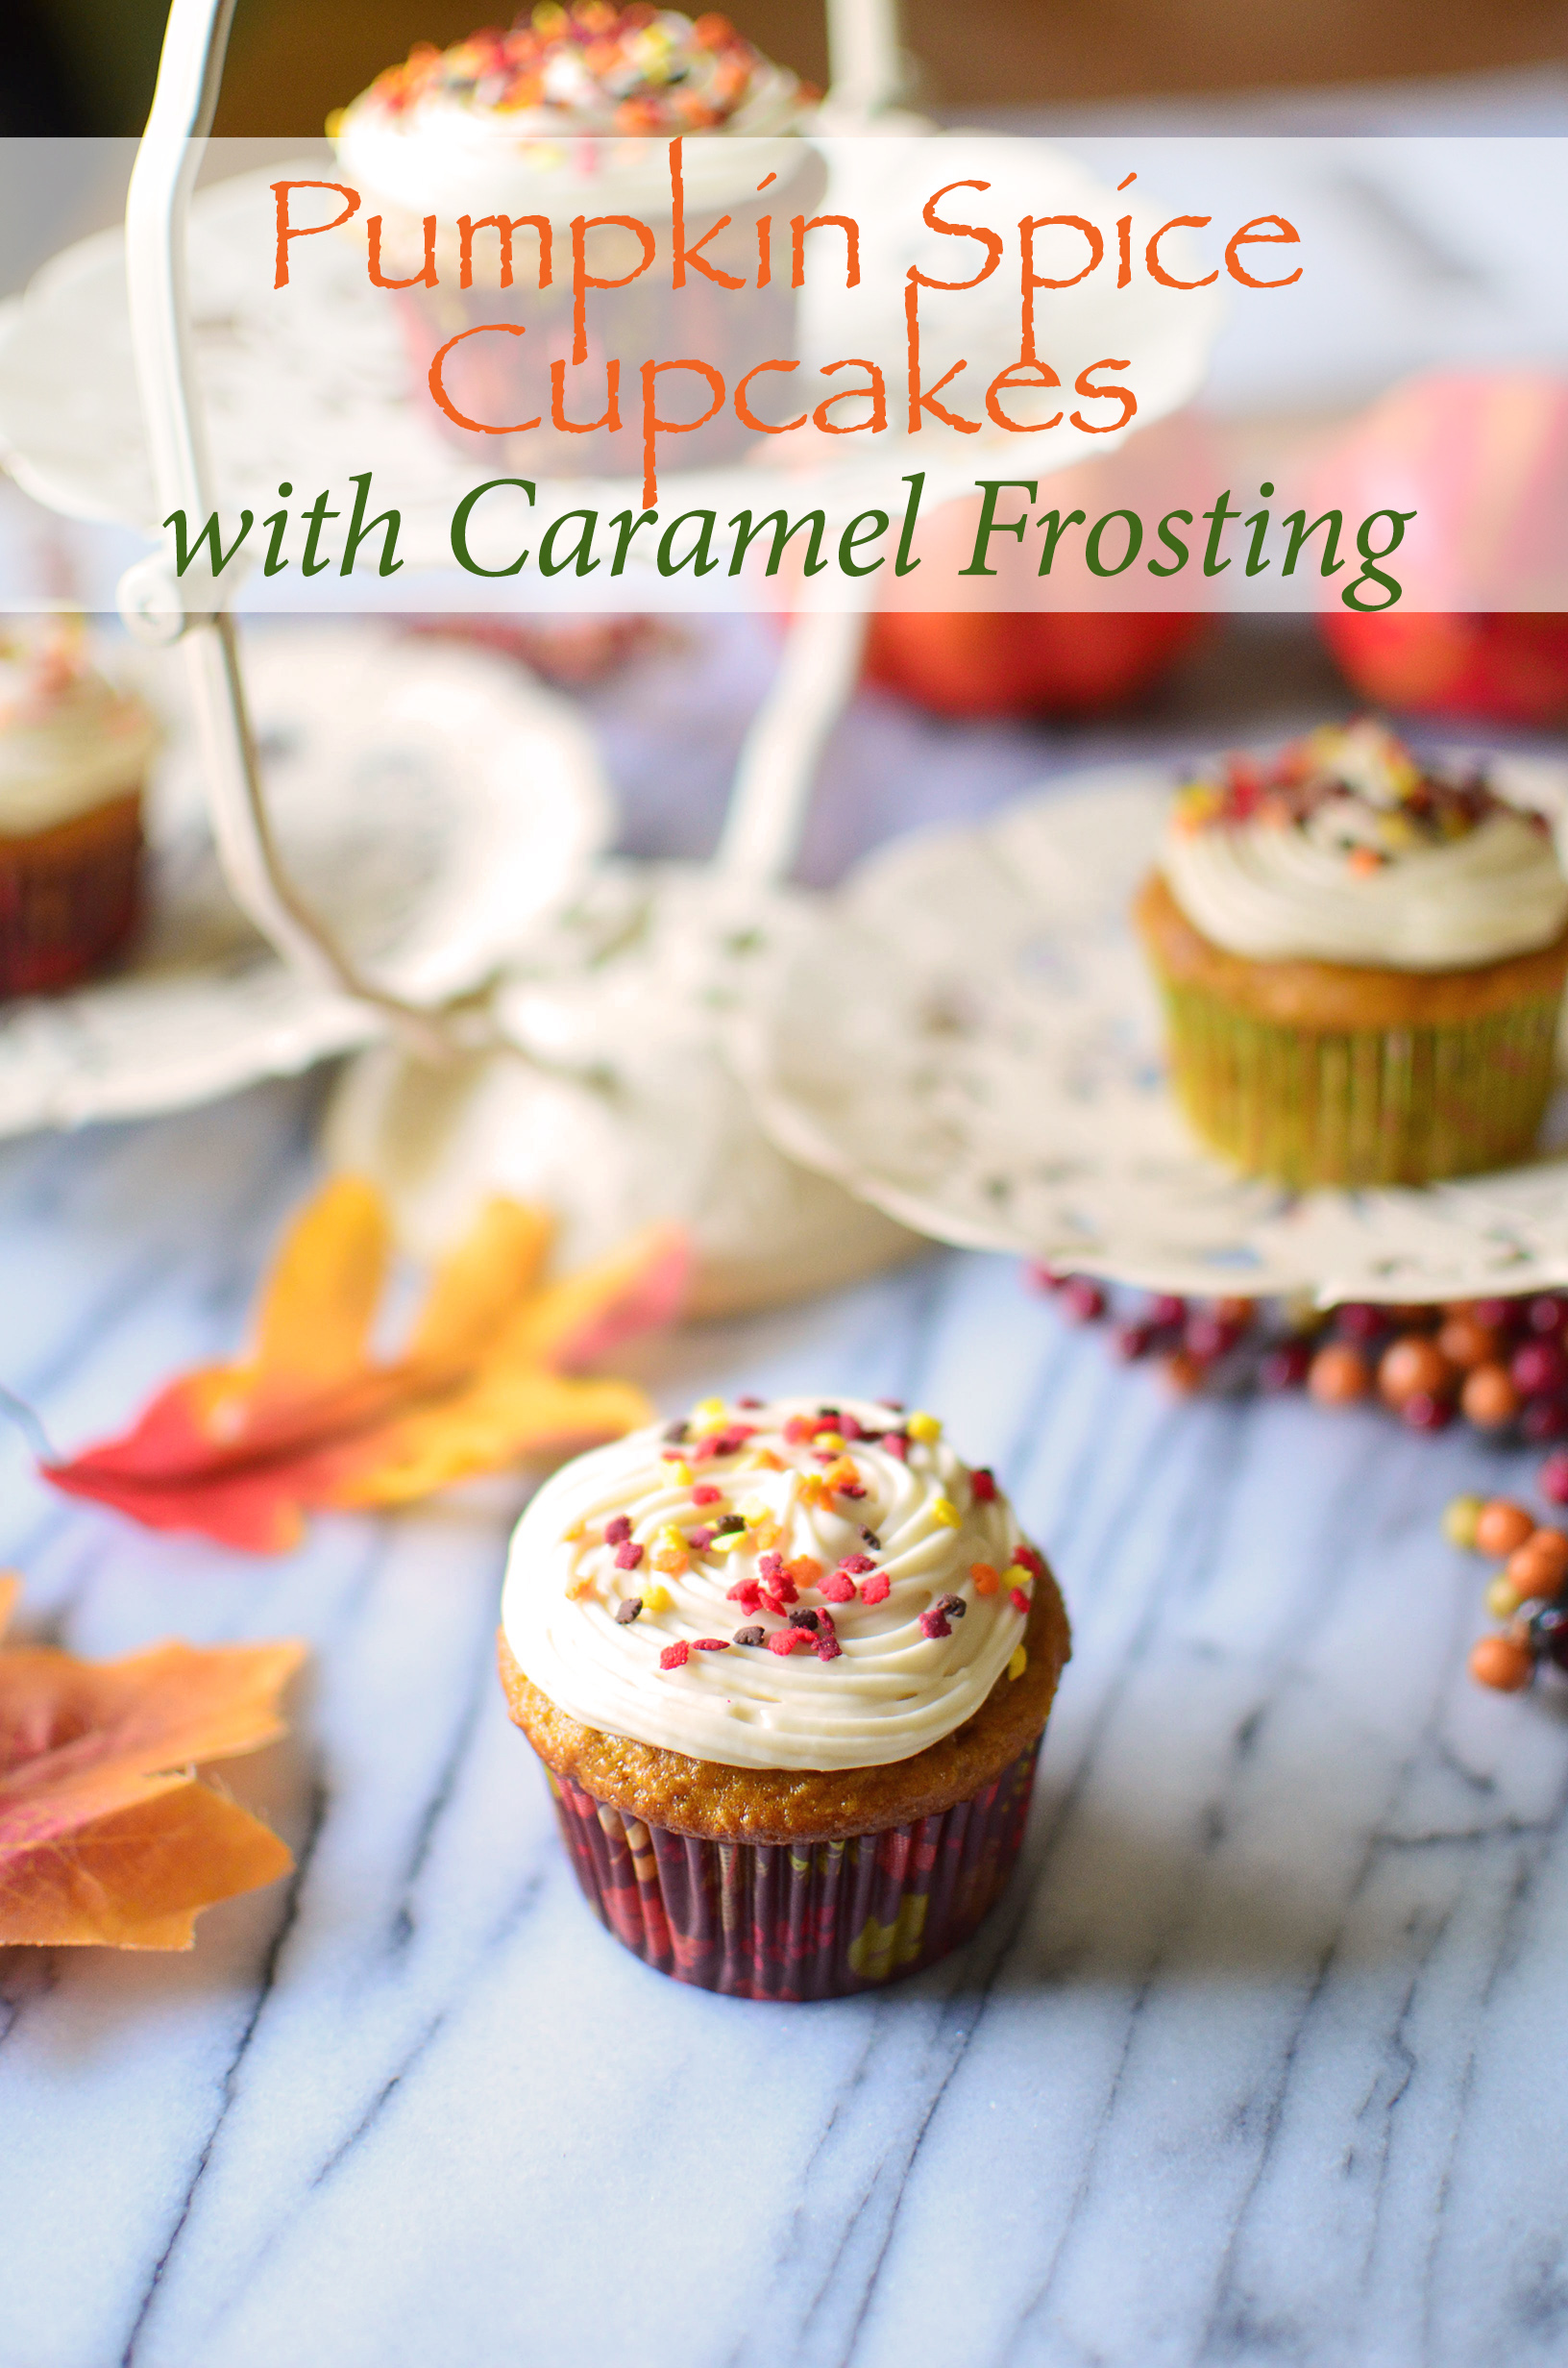 Pumpkin Spice Cupcakes with Caramel Frosting - Simple, Sweet & Savory